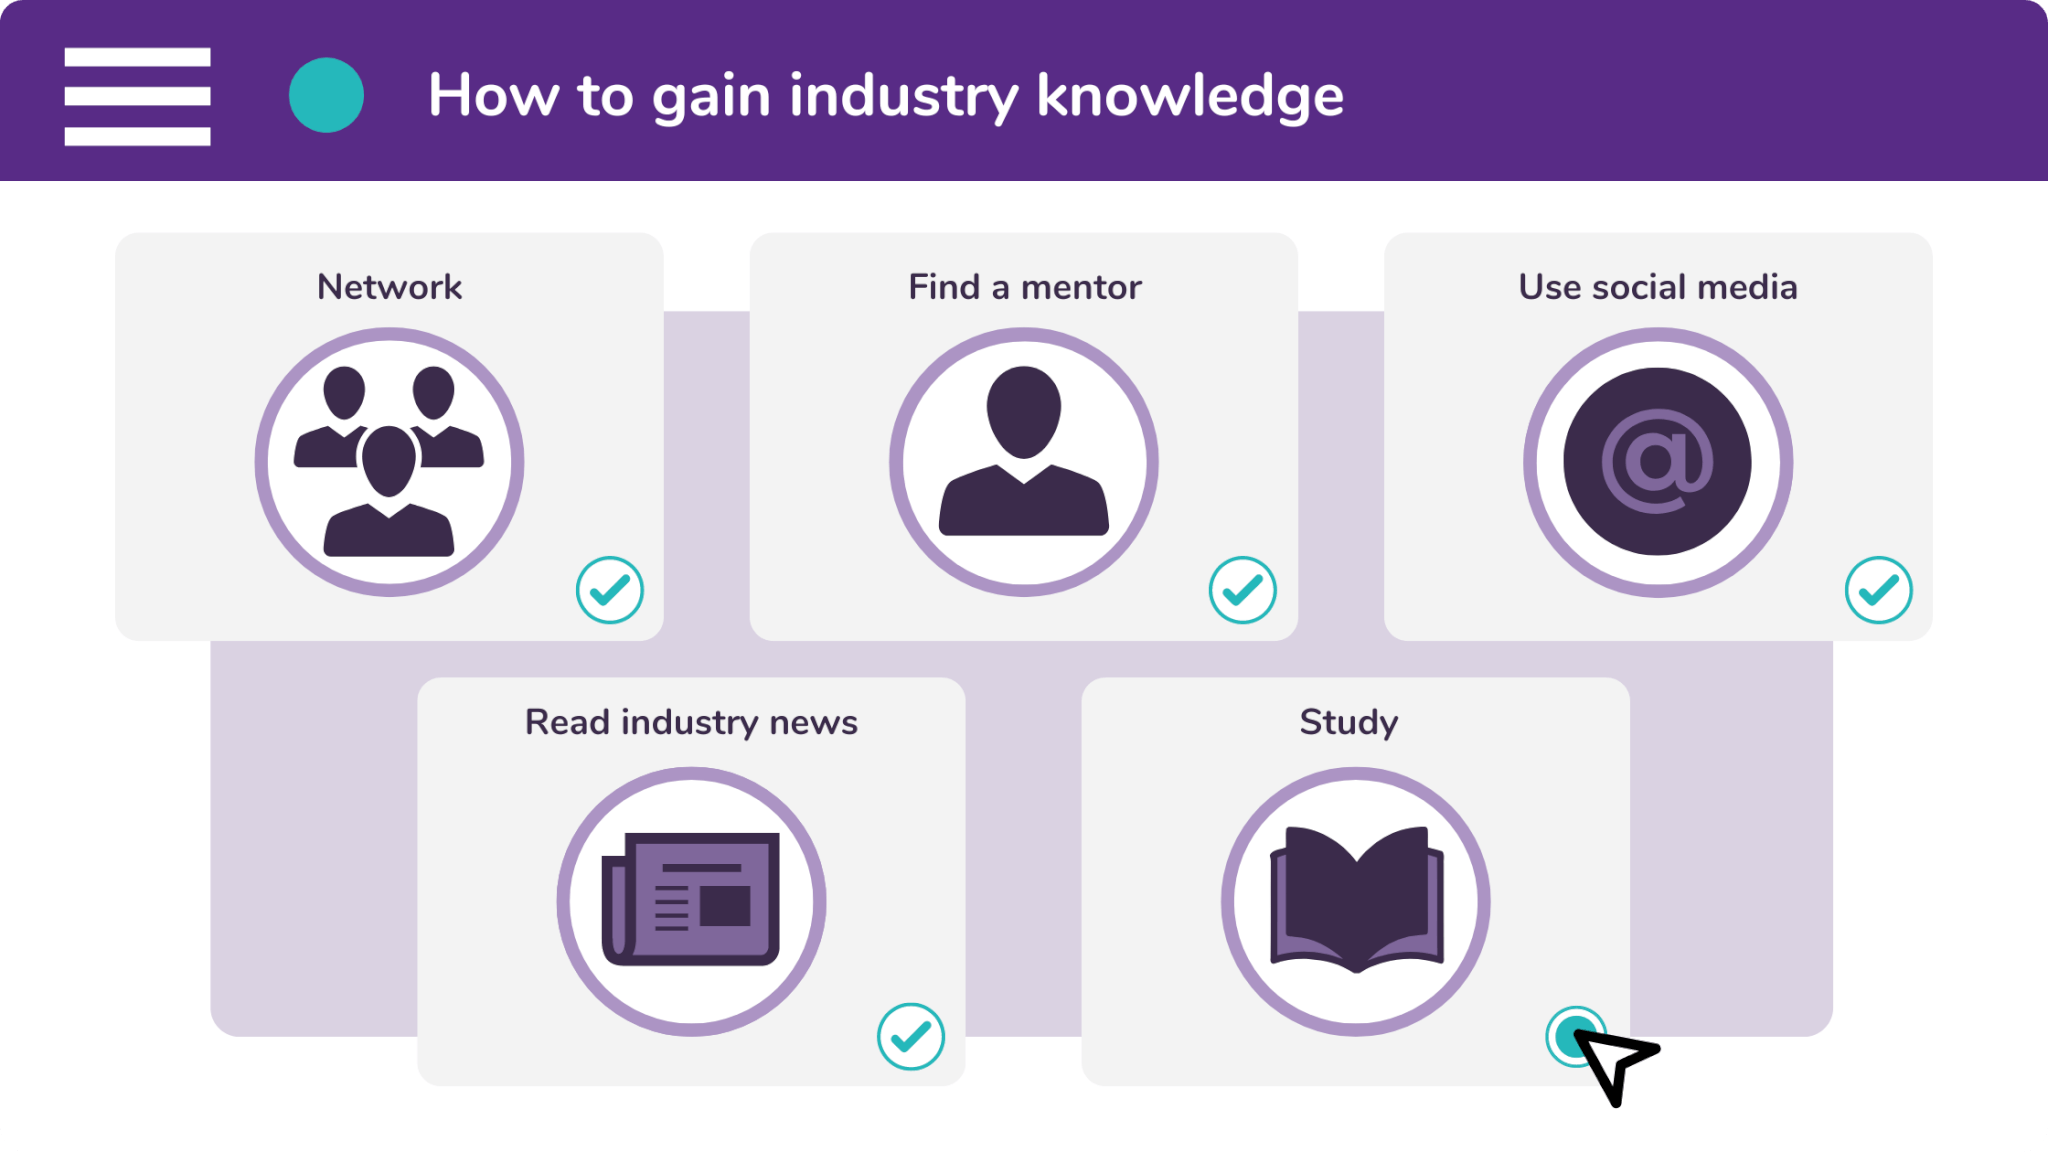 There are five things that you can do to gain industry knowledge: network, find a mentor, use social media, read industry news, and study.